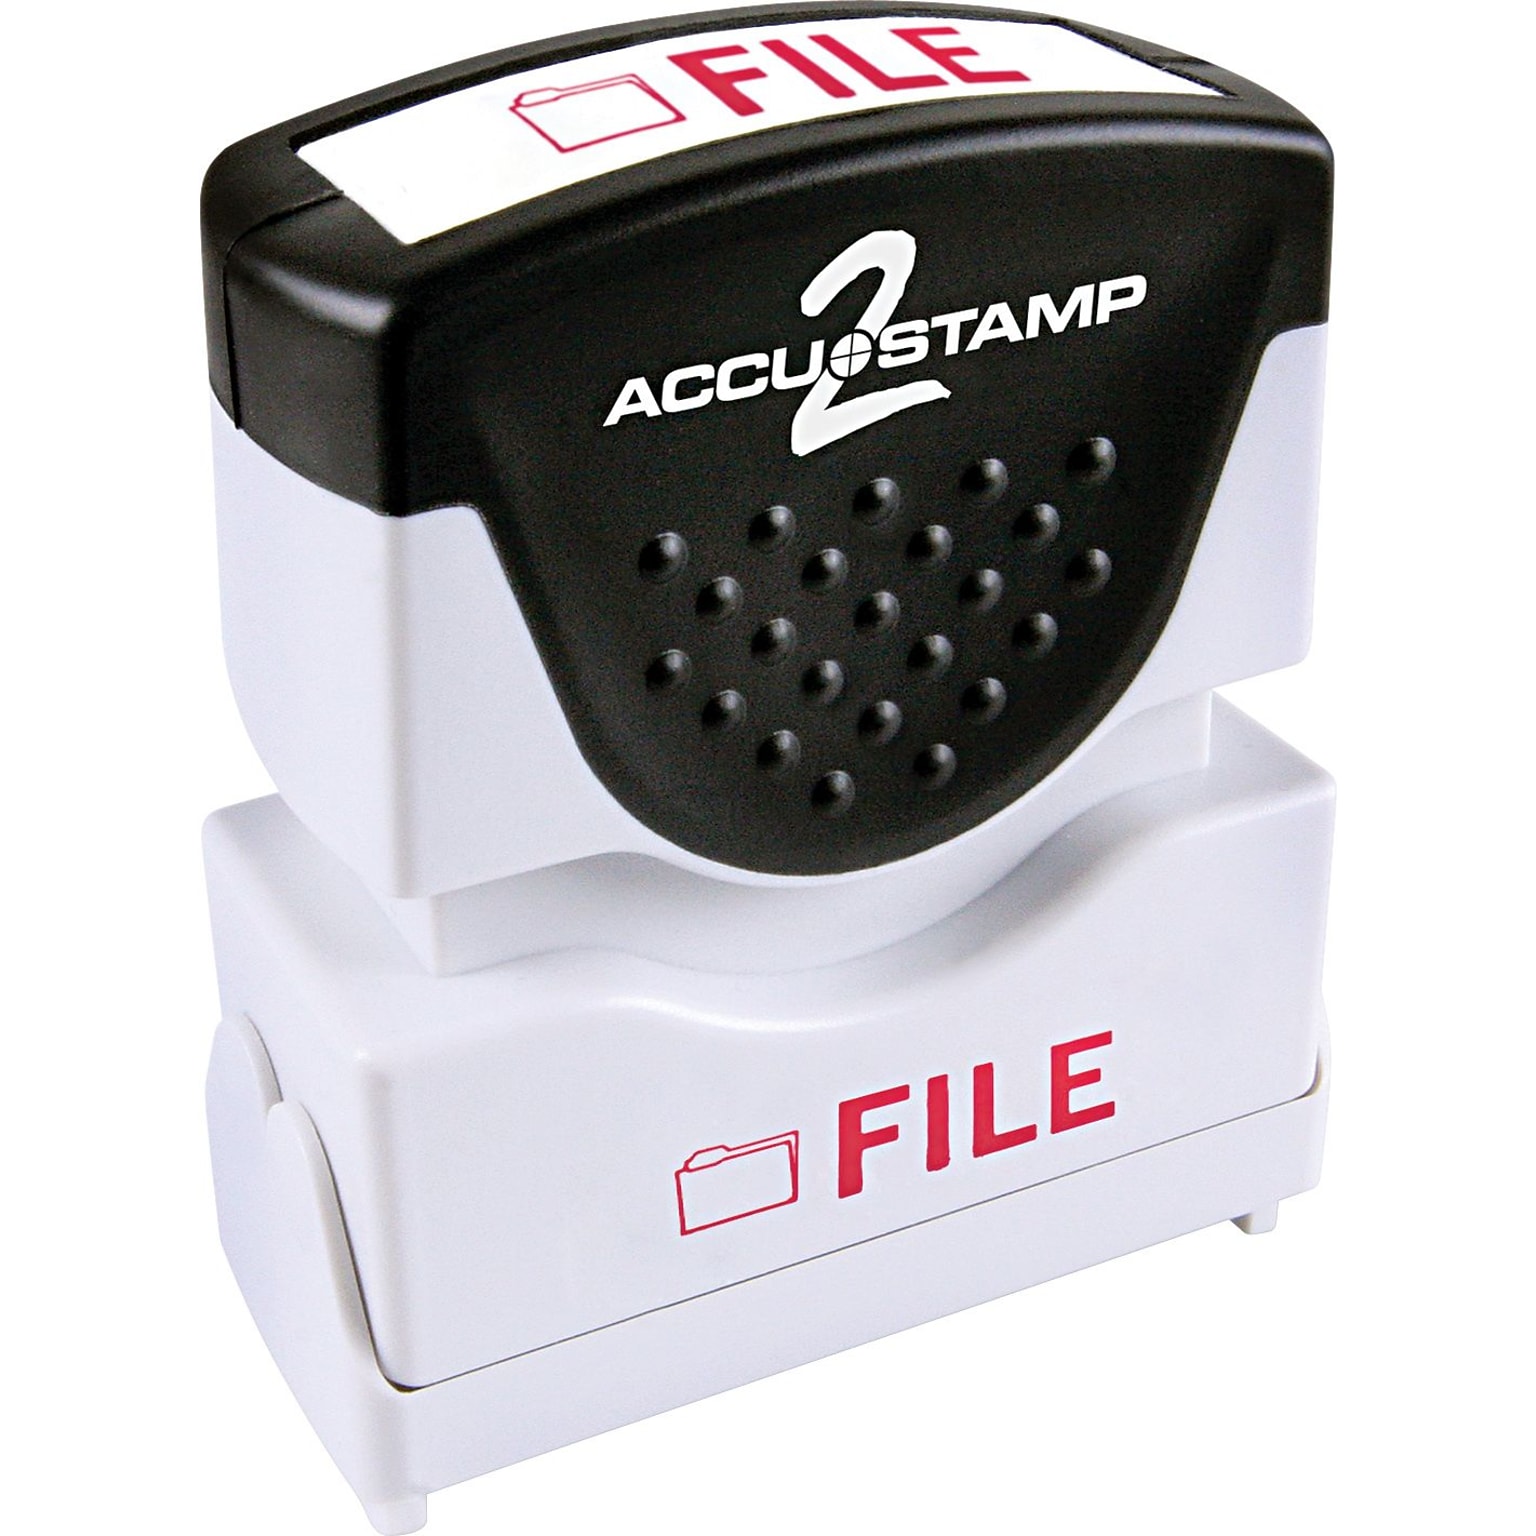 Accu-Stamp2® One-Color Pre-Inked Shutter Message Stamp, FILE, 1/2 x 1-5/8 Impression, Red Ink (035576)